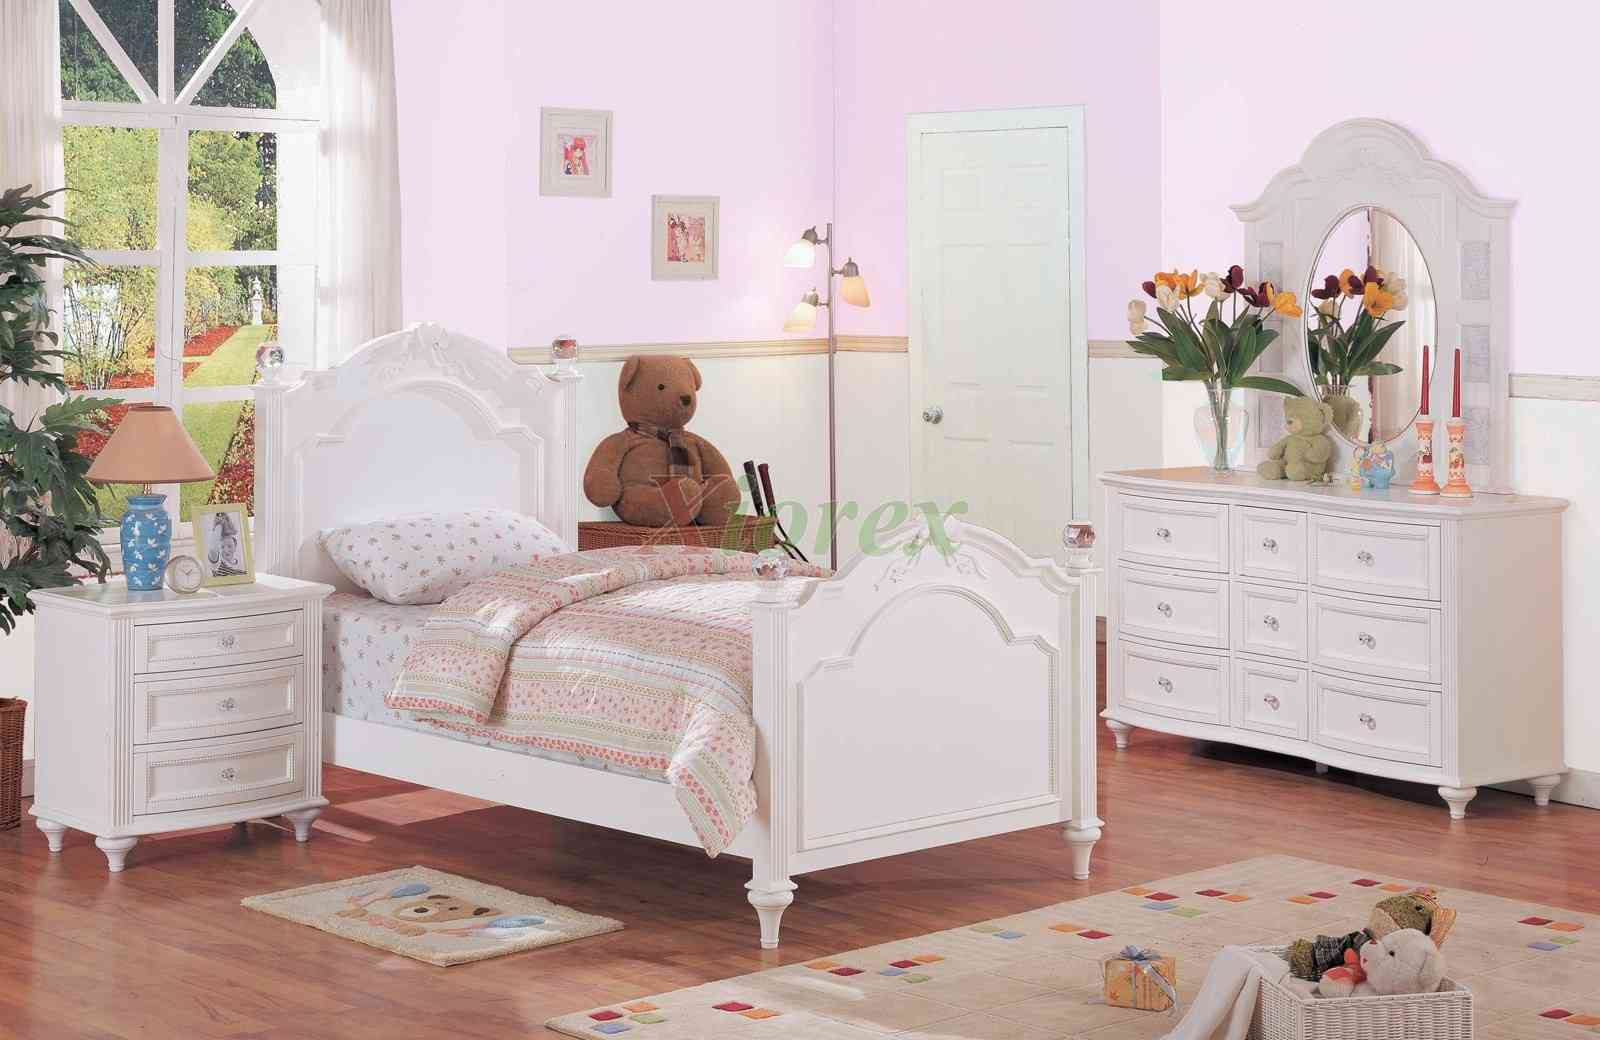 Outstanding Awesome Kids Bedroom Furniture Sets For Girls inside proportions 1600 X 1040